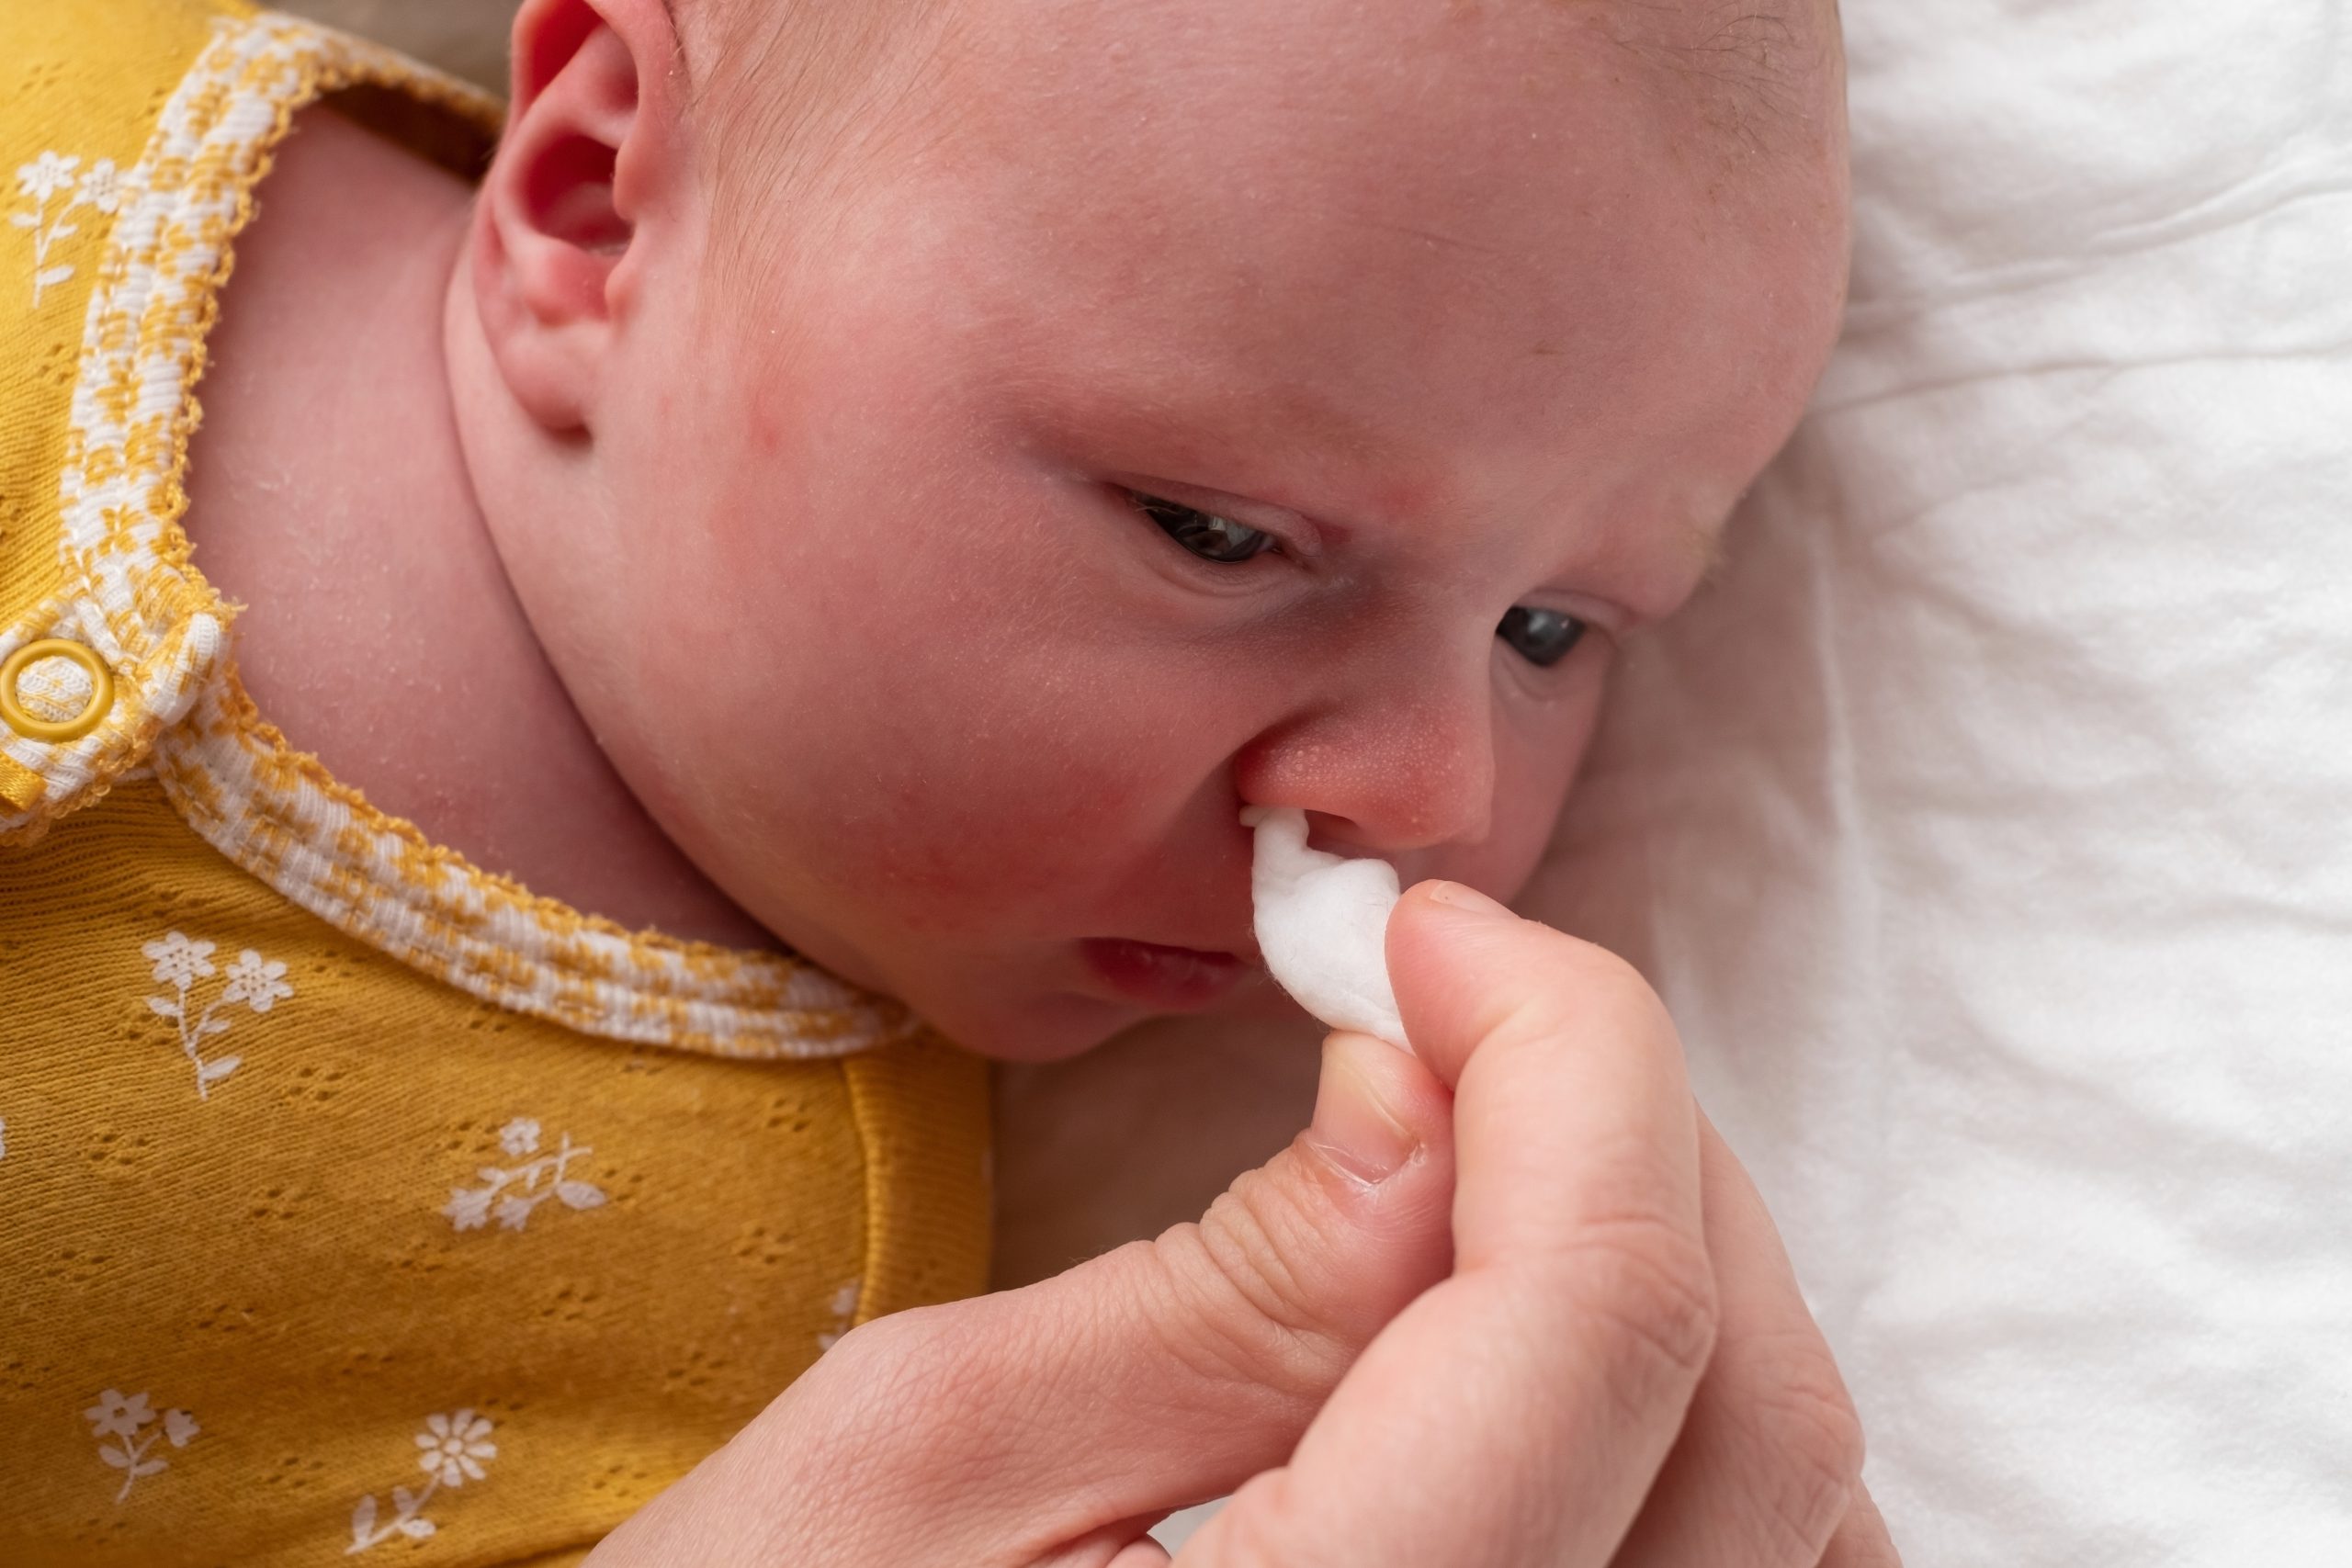 How To Get Boogers Out Of Baby's Nose: Nasal Congestion